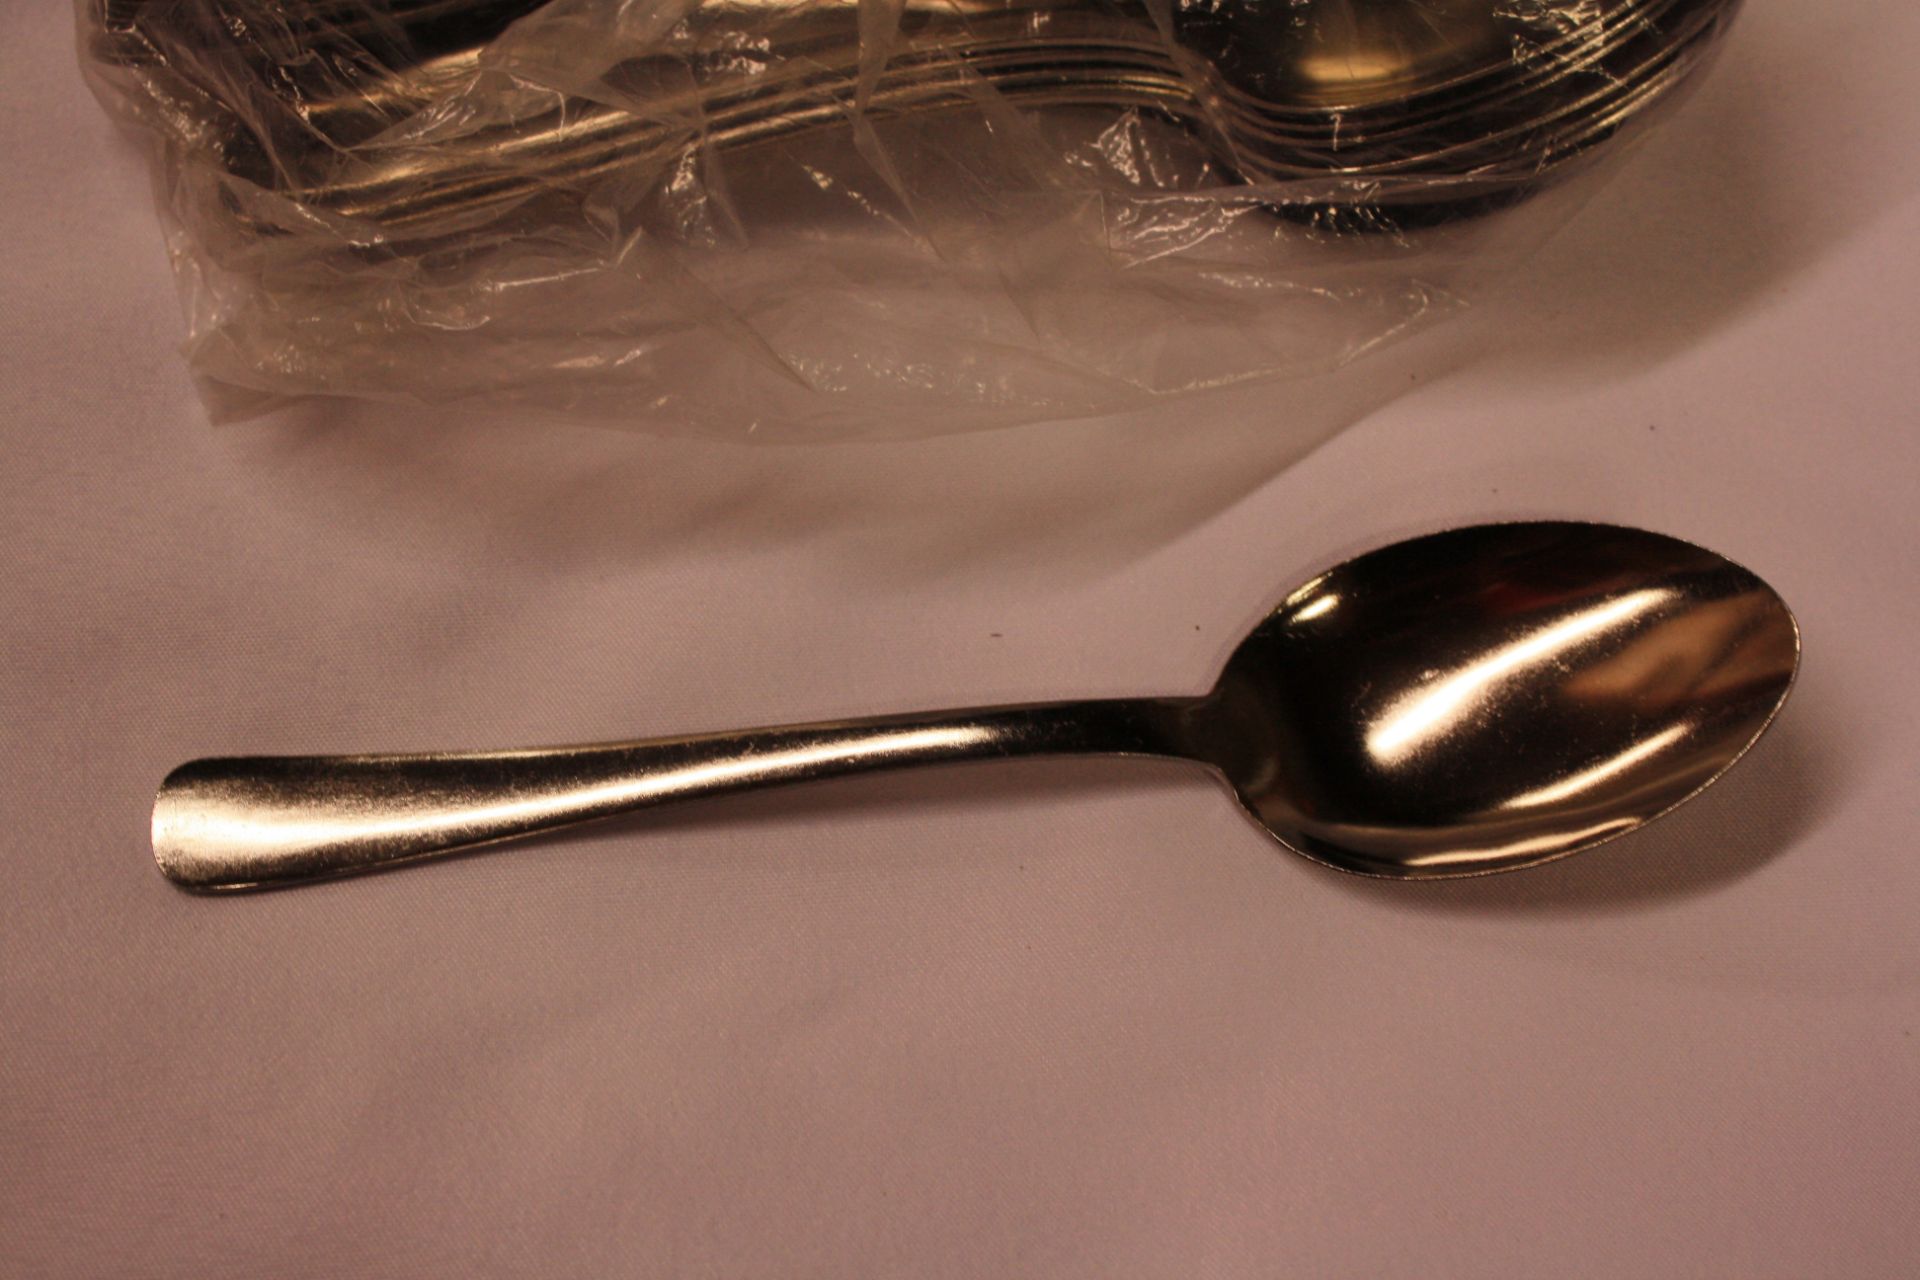 Lot of 53 Table Spoon, Stainless Steel by Delco